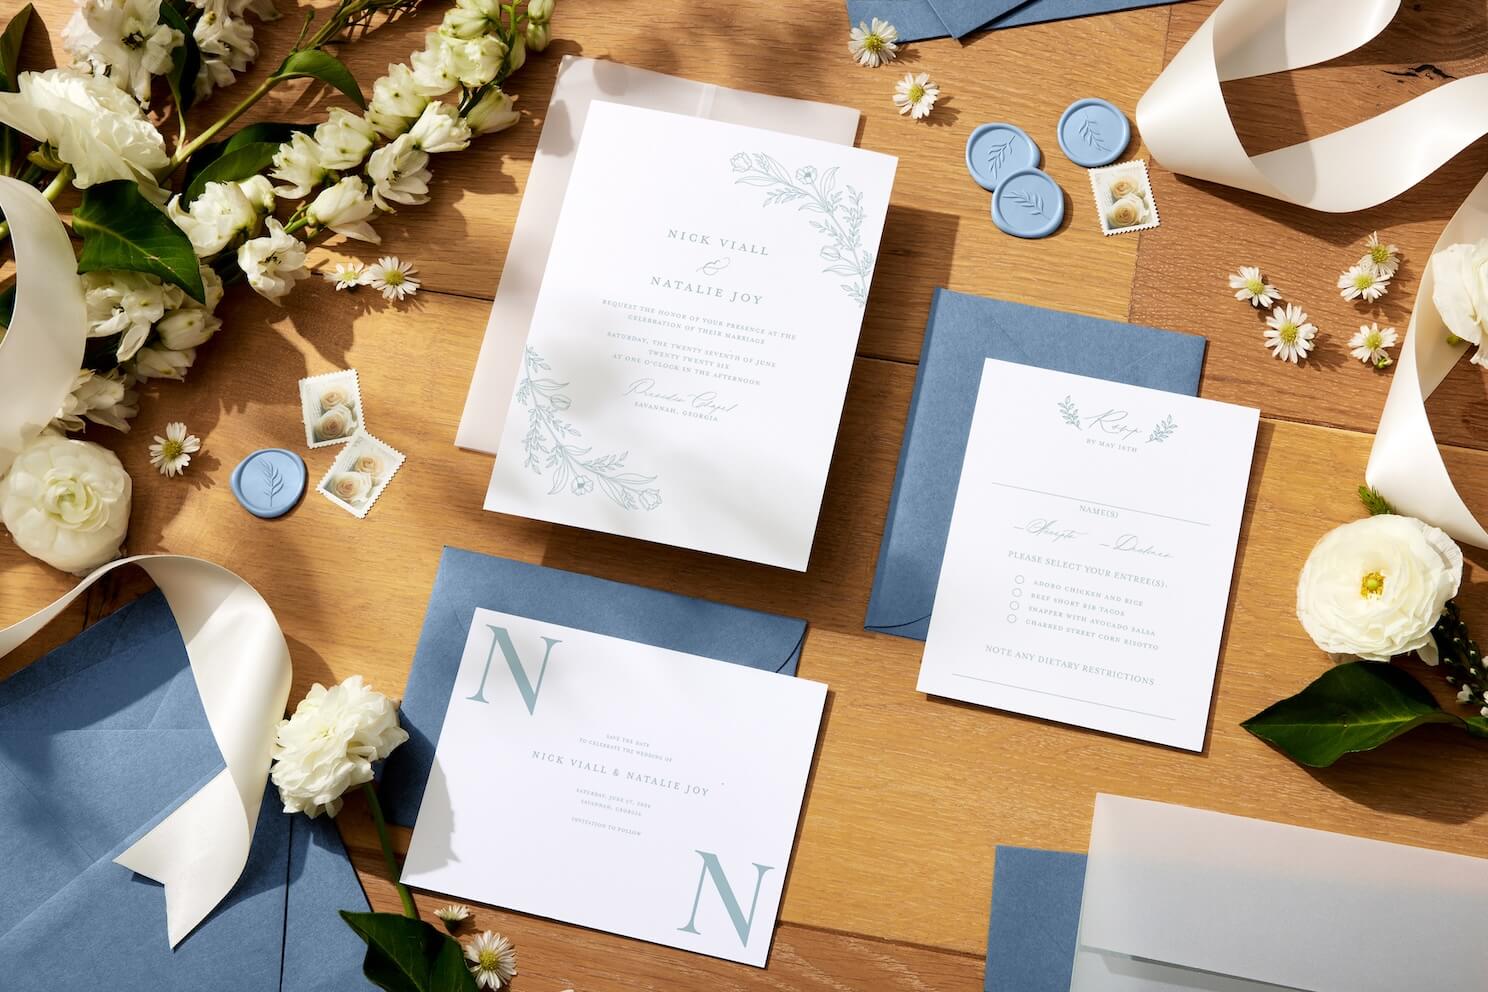 Invitation cards featuring Nick Viall and Natalie Joy